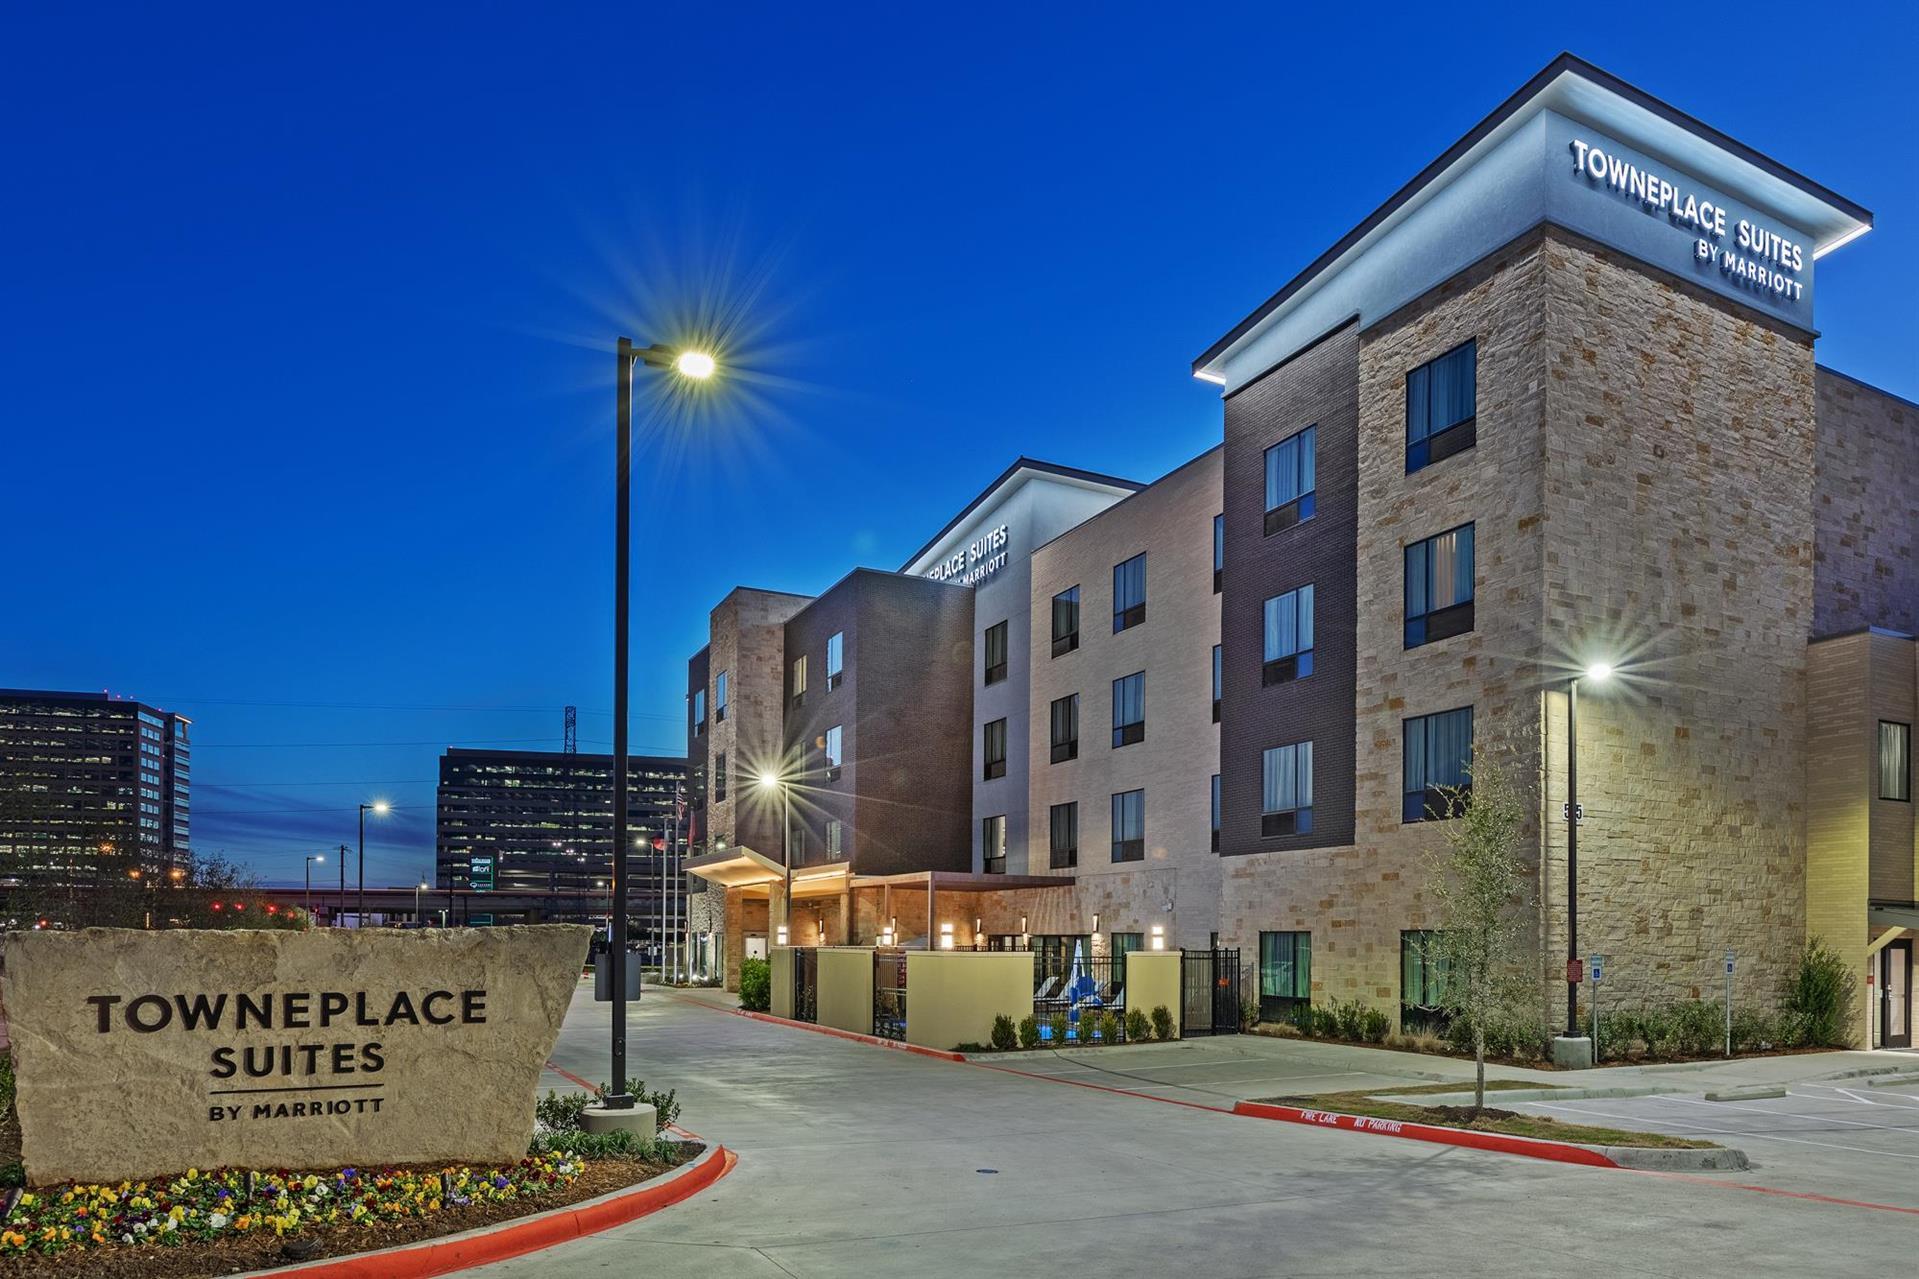 TownePlace Suites Dallas Plano/Richardson in Plano, TX